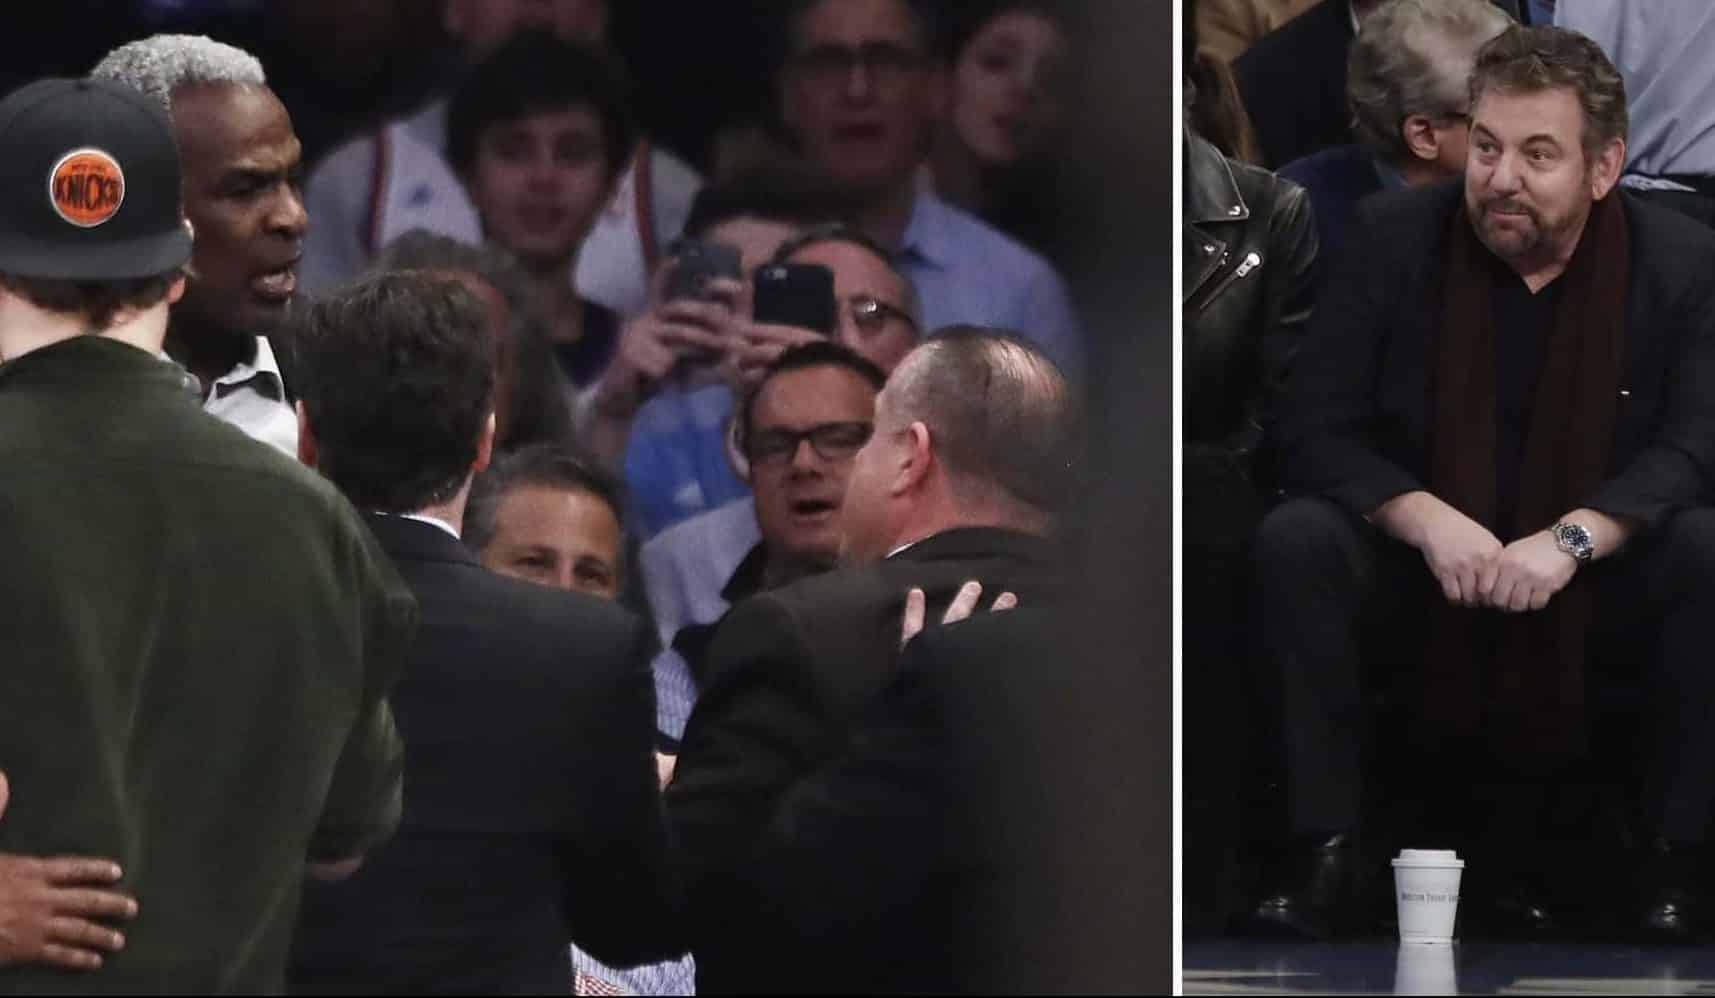 FILE - At left, in a Feb. 8, 2017, file photo, former New York Knicks player Charles Oakley, rear left, exchanges words with a security guard during the first half of an NBA basketball game between the Knicks and the Los Angeles Clippers, in New York. At right, also in a Feb. 8, 2017, file photo, Madison Square Garden Executive Chairman James Dolan watches the altercation. Oakley has sued the team's owners, saying he was defamed when they claimed he committed assault and was an alcoholic. The lawsuit details how Oakley was treated before and after he was forcefully removed from Madison Square Garden during a Feb. 8 game. The lawsuit filed Tuesday, Sept. 12, 2017, seeks unspecified damages.